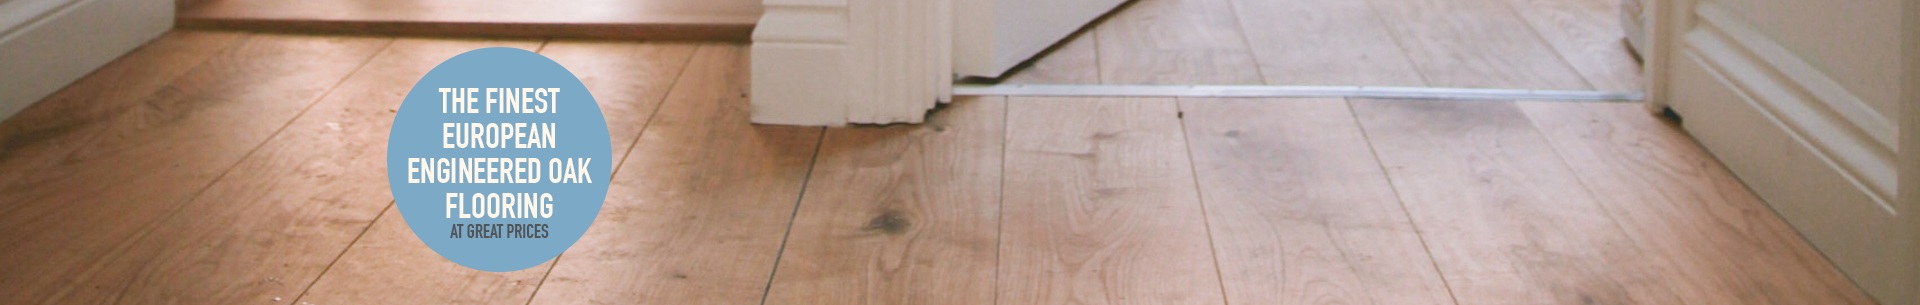 The finest European Engineered Oak flooring at great prices